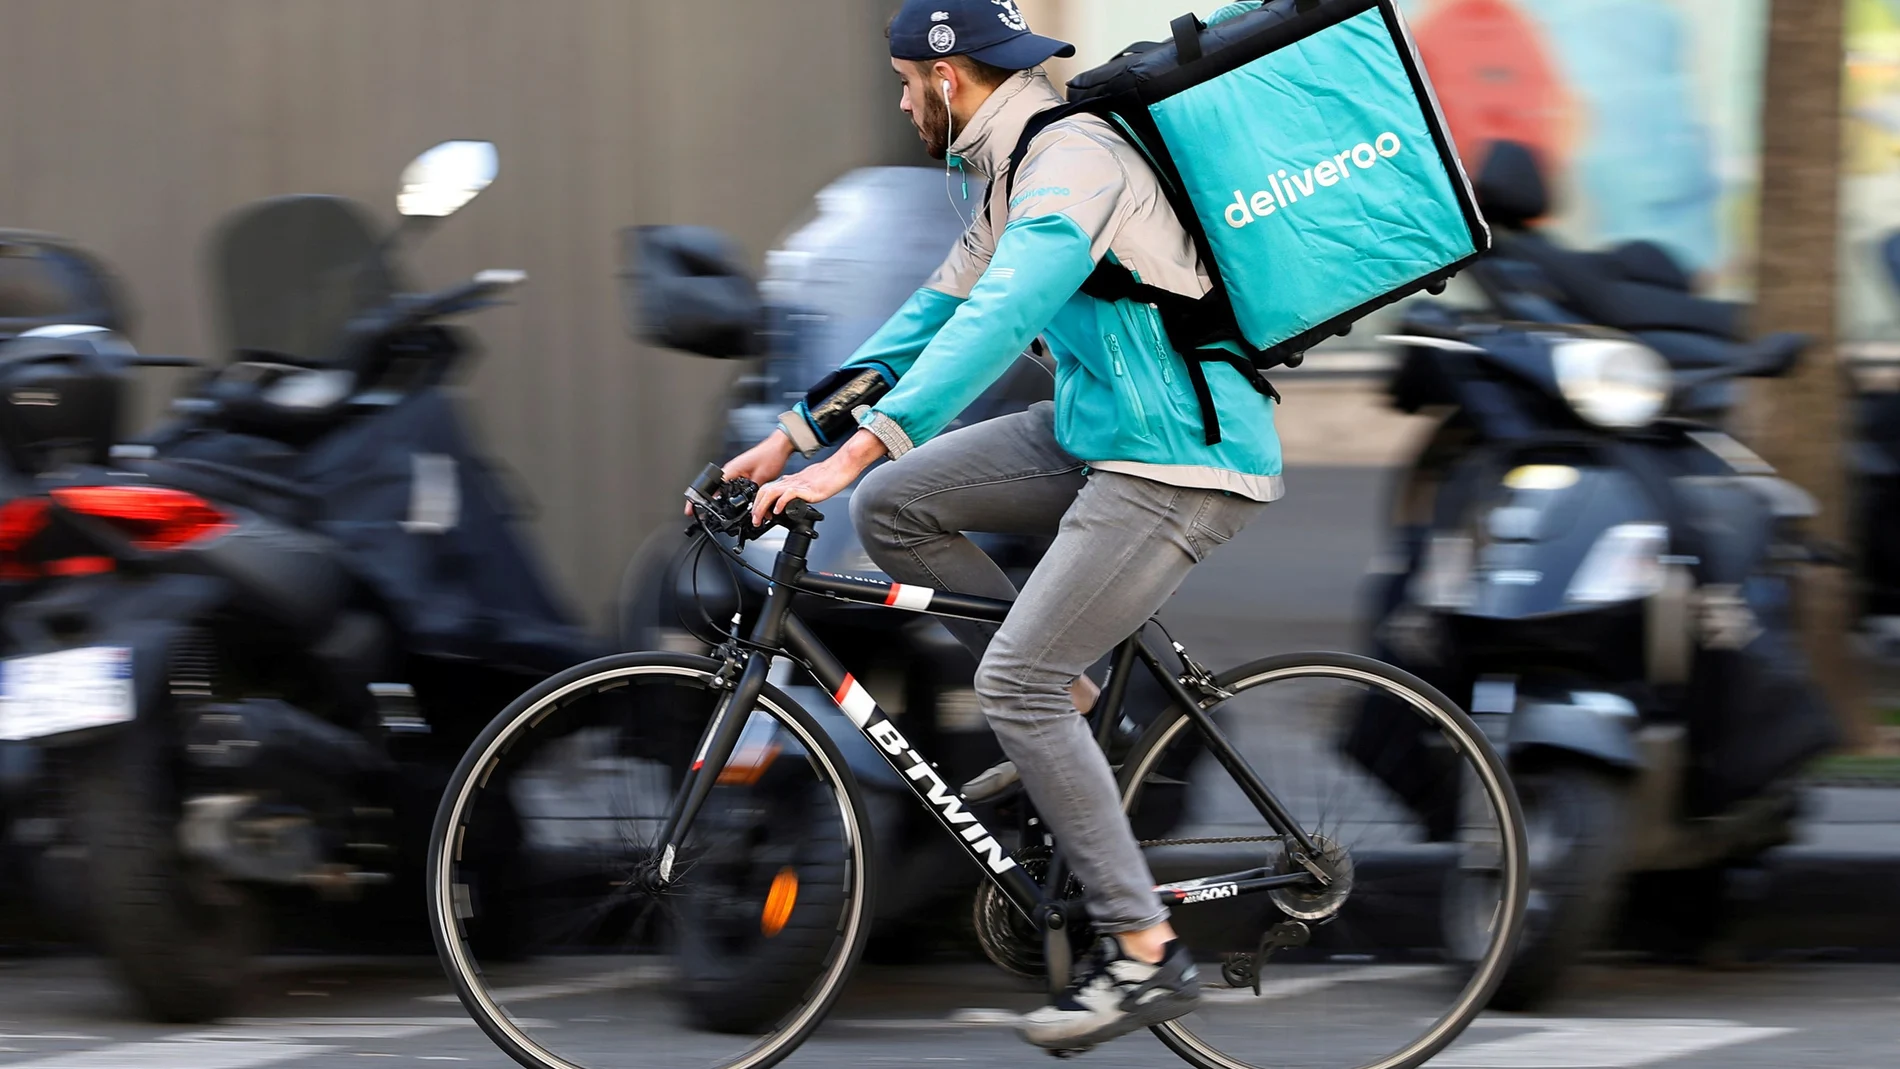 FILE PHOTO: A cyclist rides a bicycle as he delivers a food order for Deliveroo, an example of the emergence of what is known as the 'gig economy', in Paris